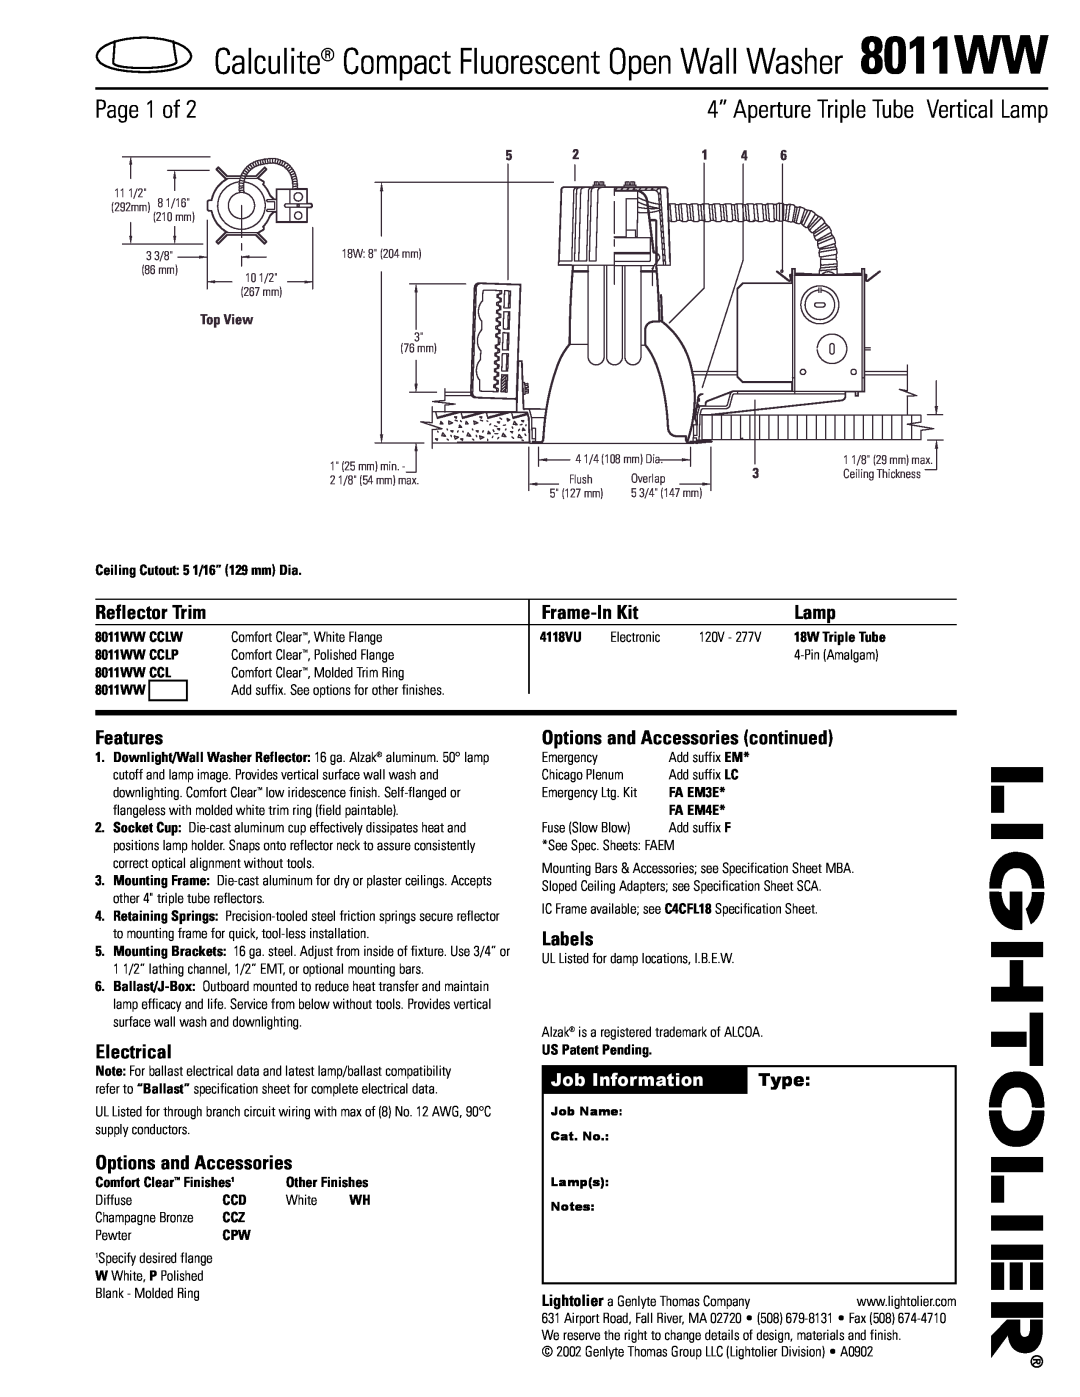 Lightolier 8011WW specifications Page 1 of, 4” Aperture Triple Tube Vertical Lamp, Job Information, Type, Reflector Trim 